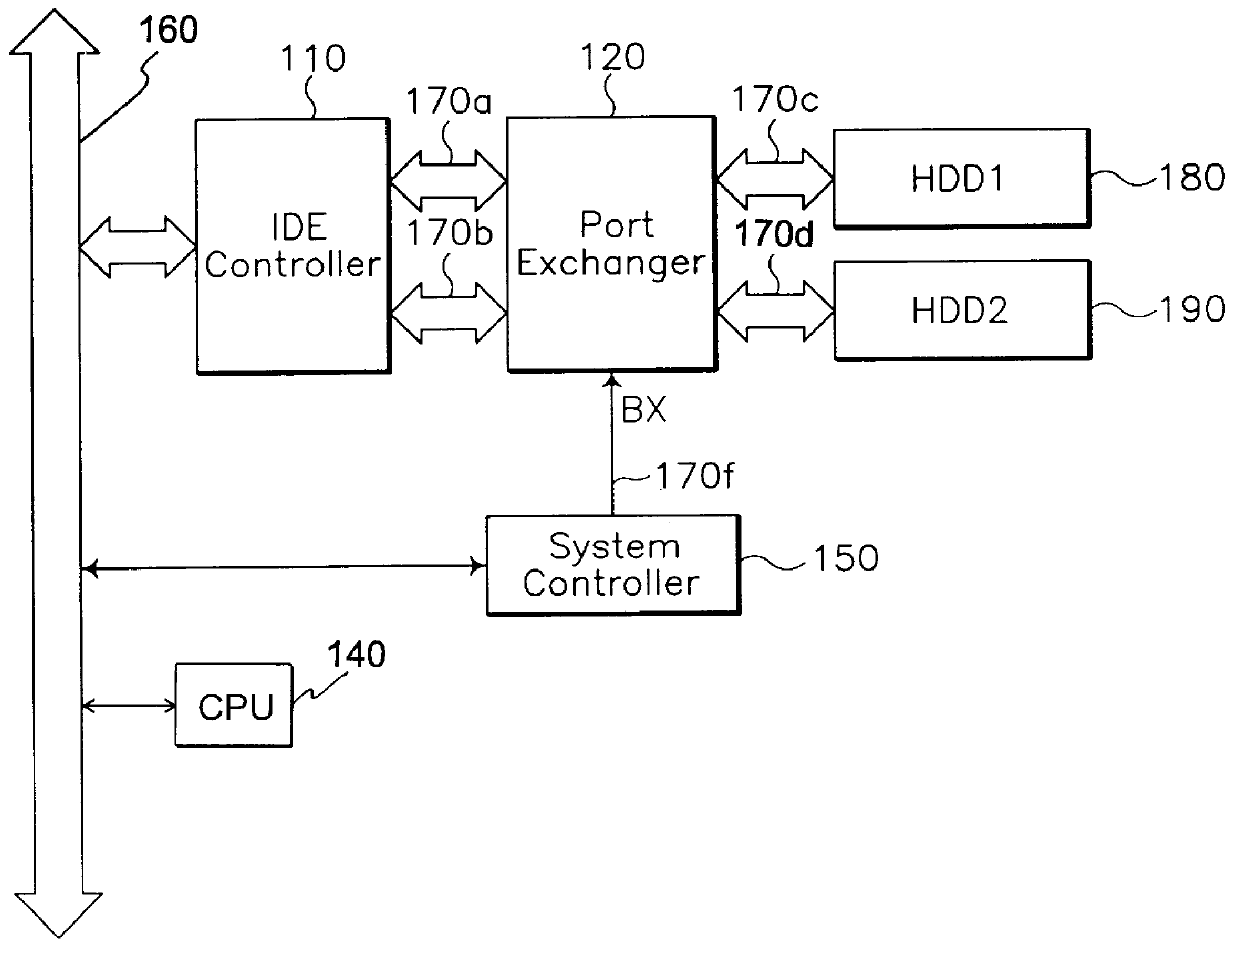 Computer system capable of selective booting from two hard disk drives